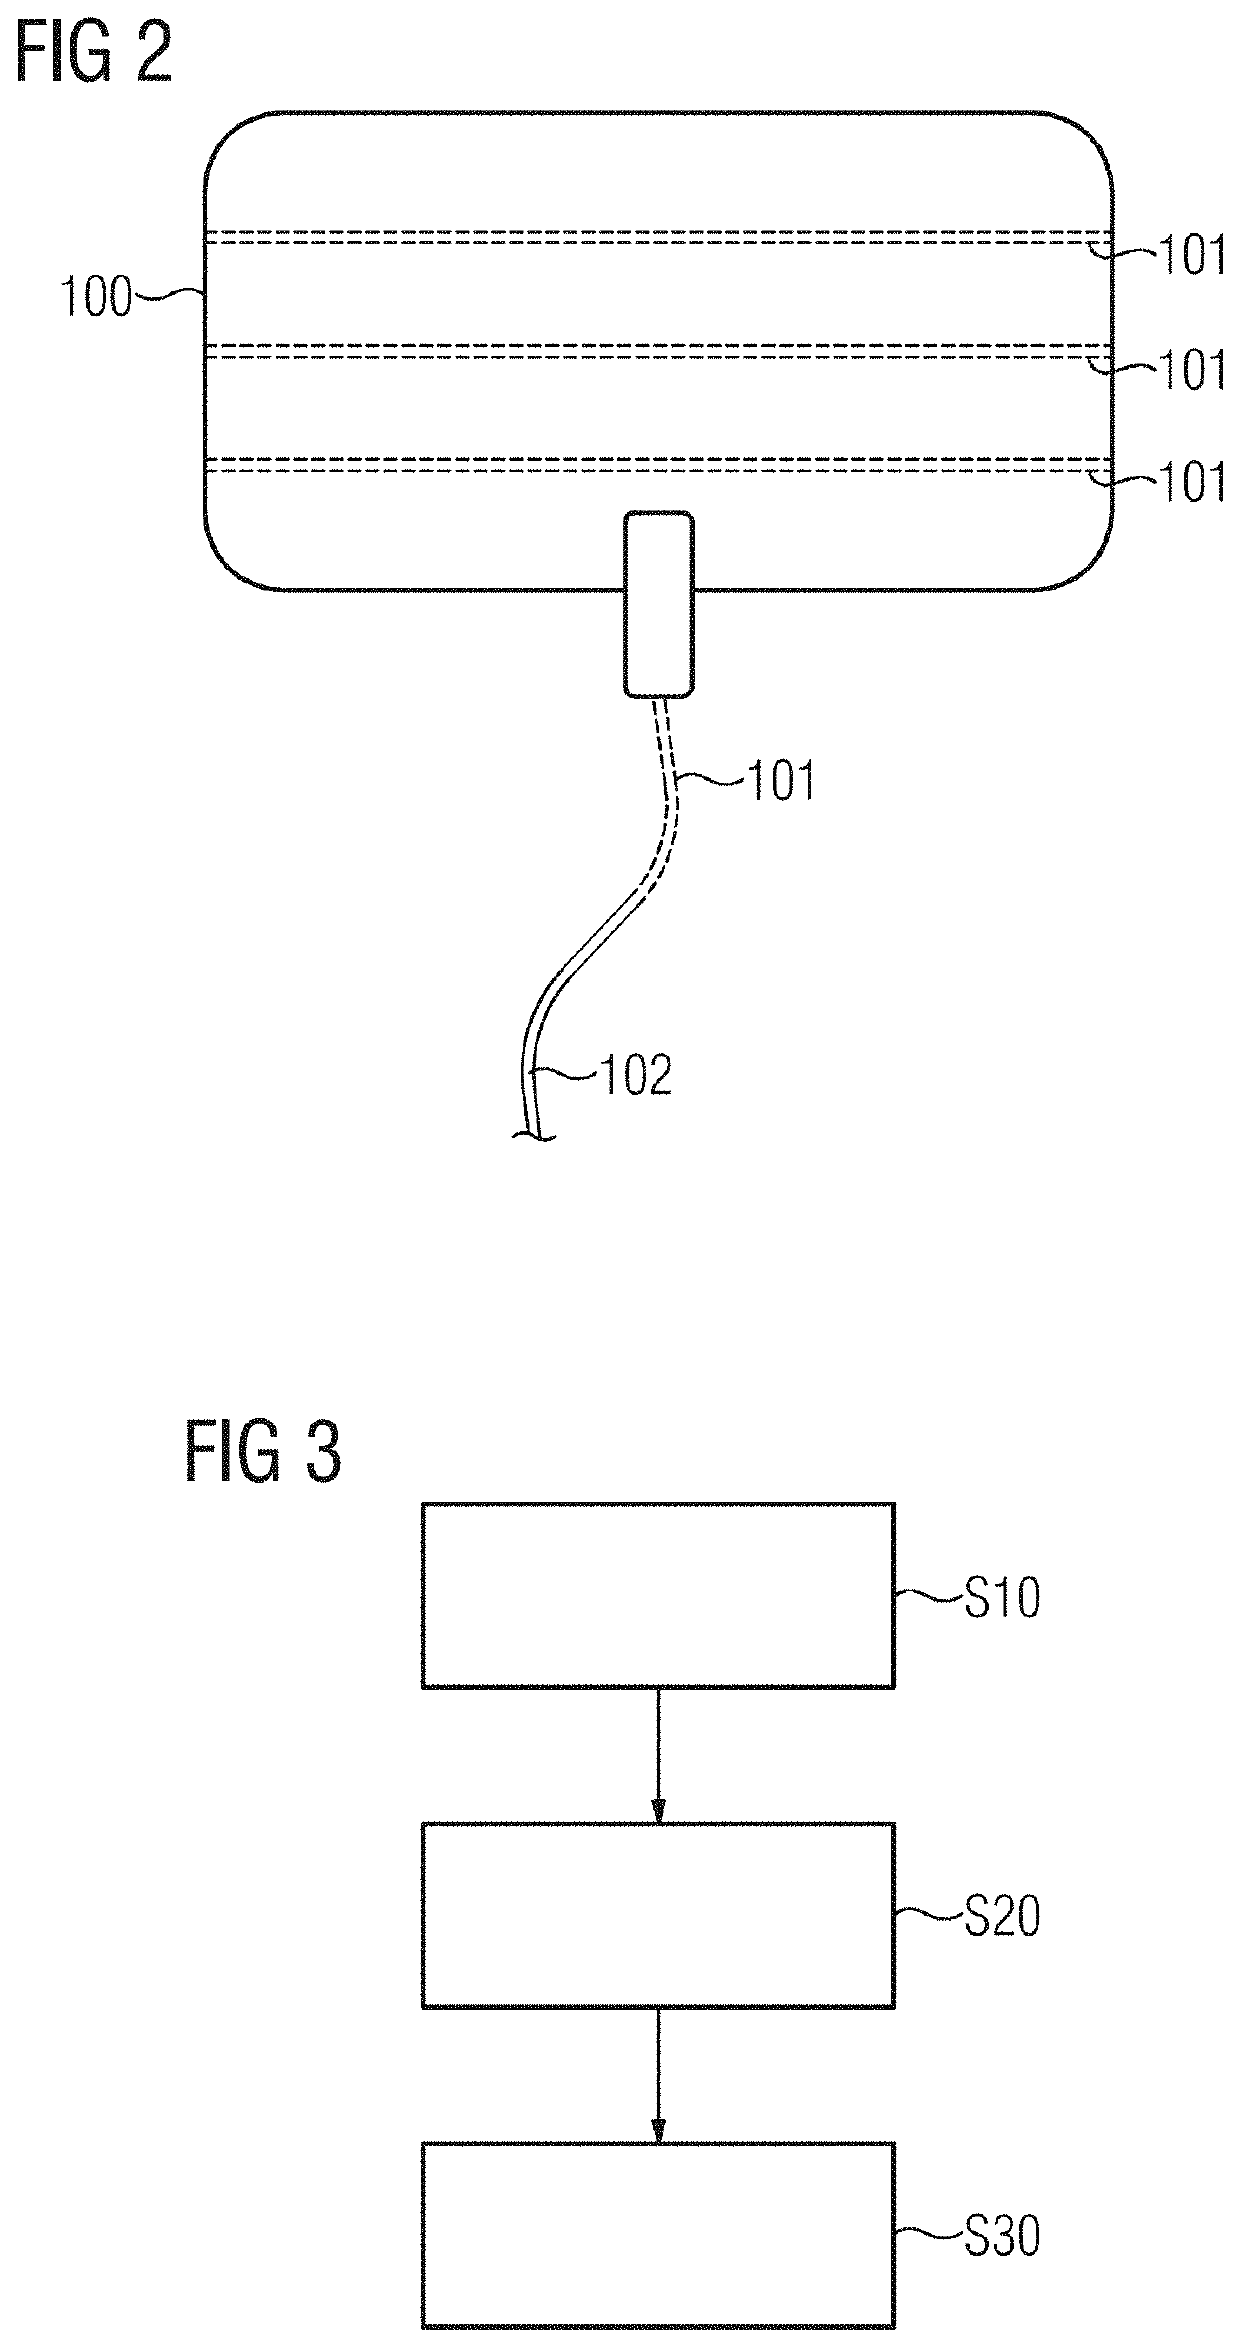 Predicting a potential failure of a module for use in a magnetic resonance apparatus